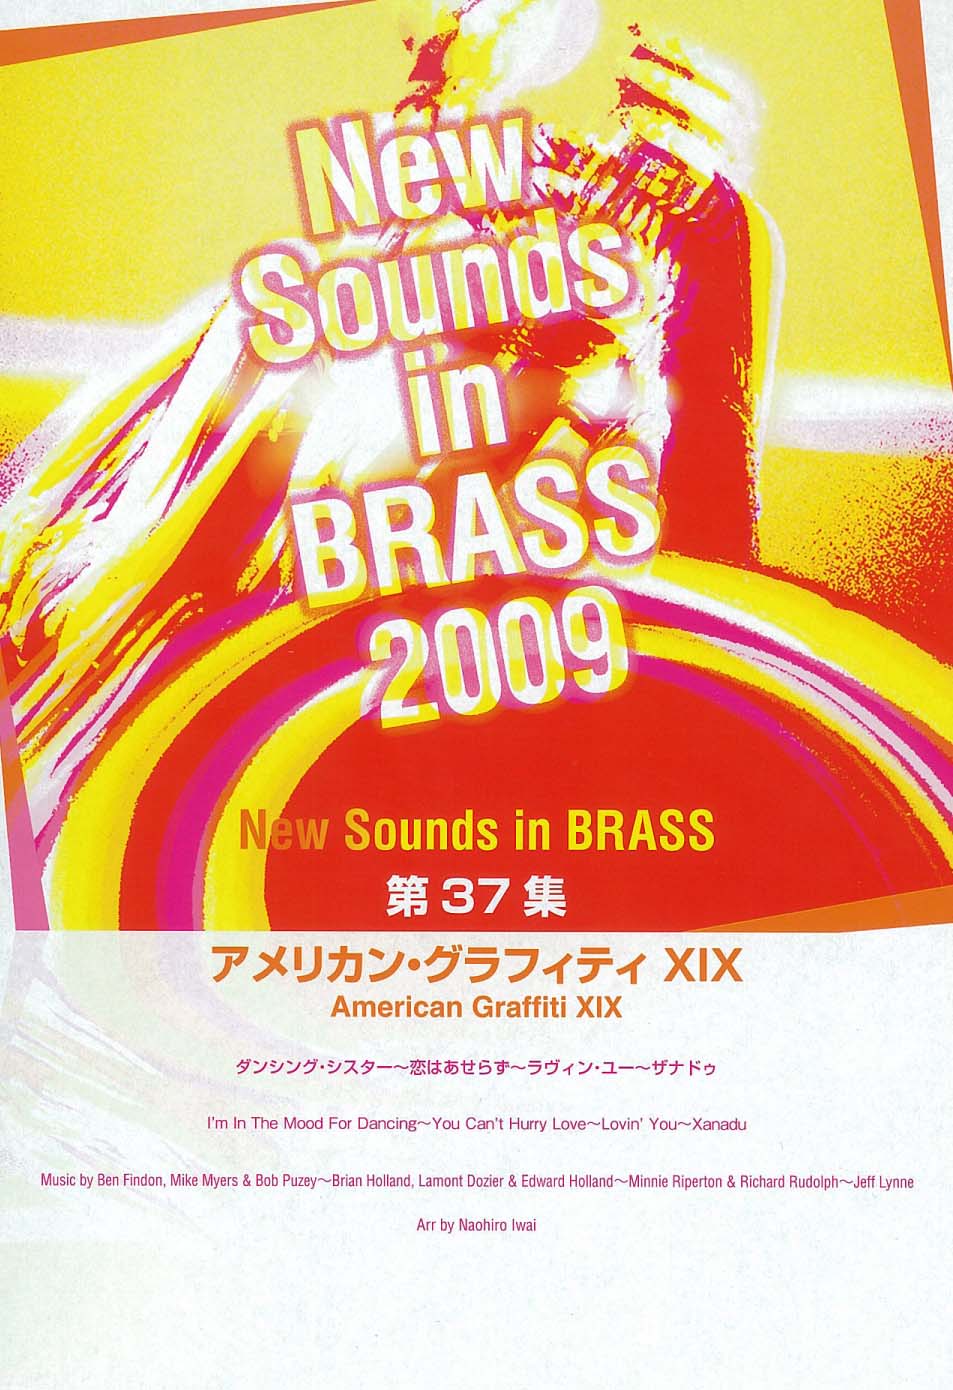 New Sounds in Brass NSB 第37集 アメリカン・グラフィティ XIX